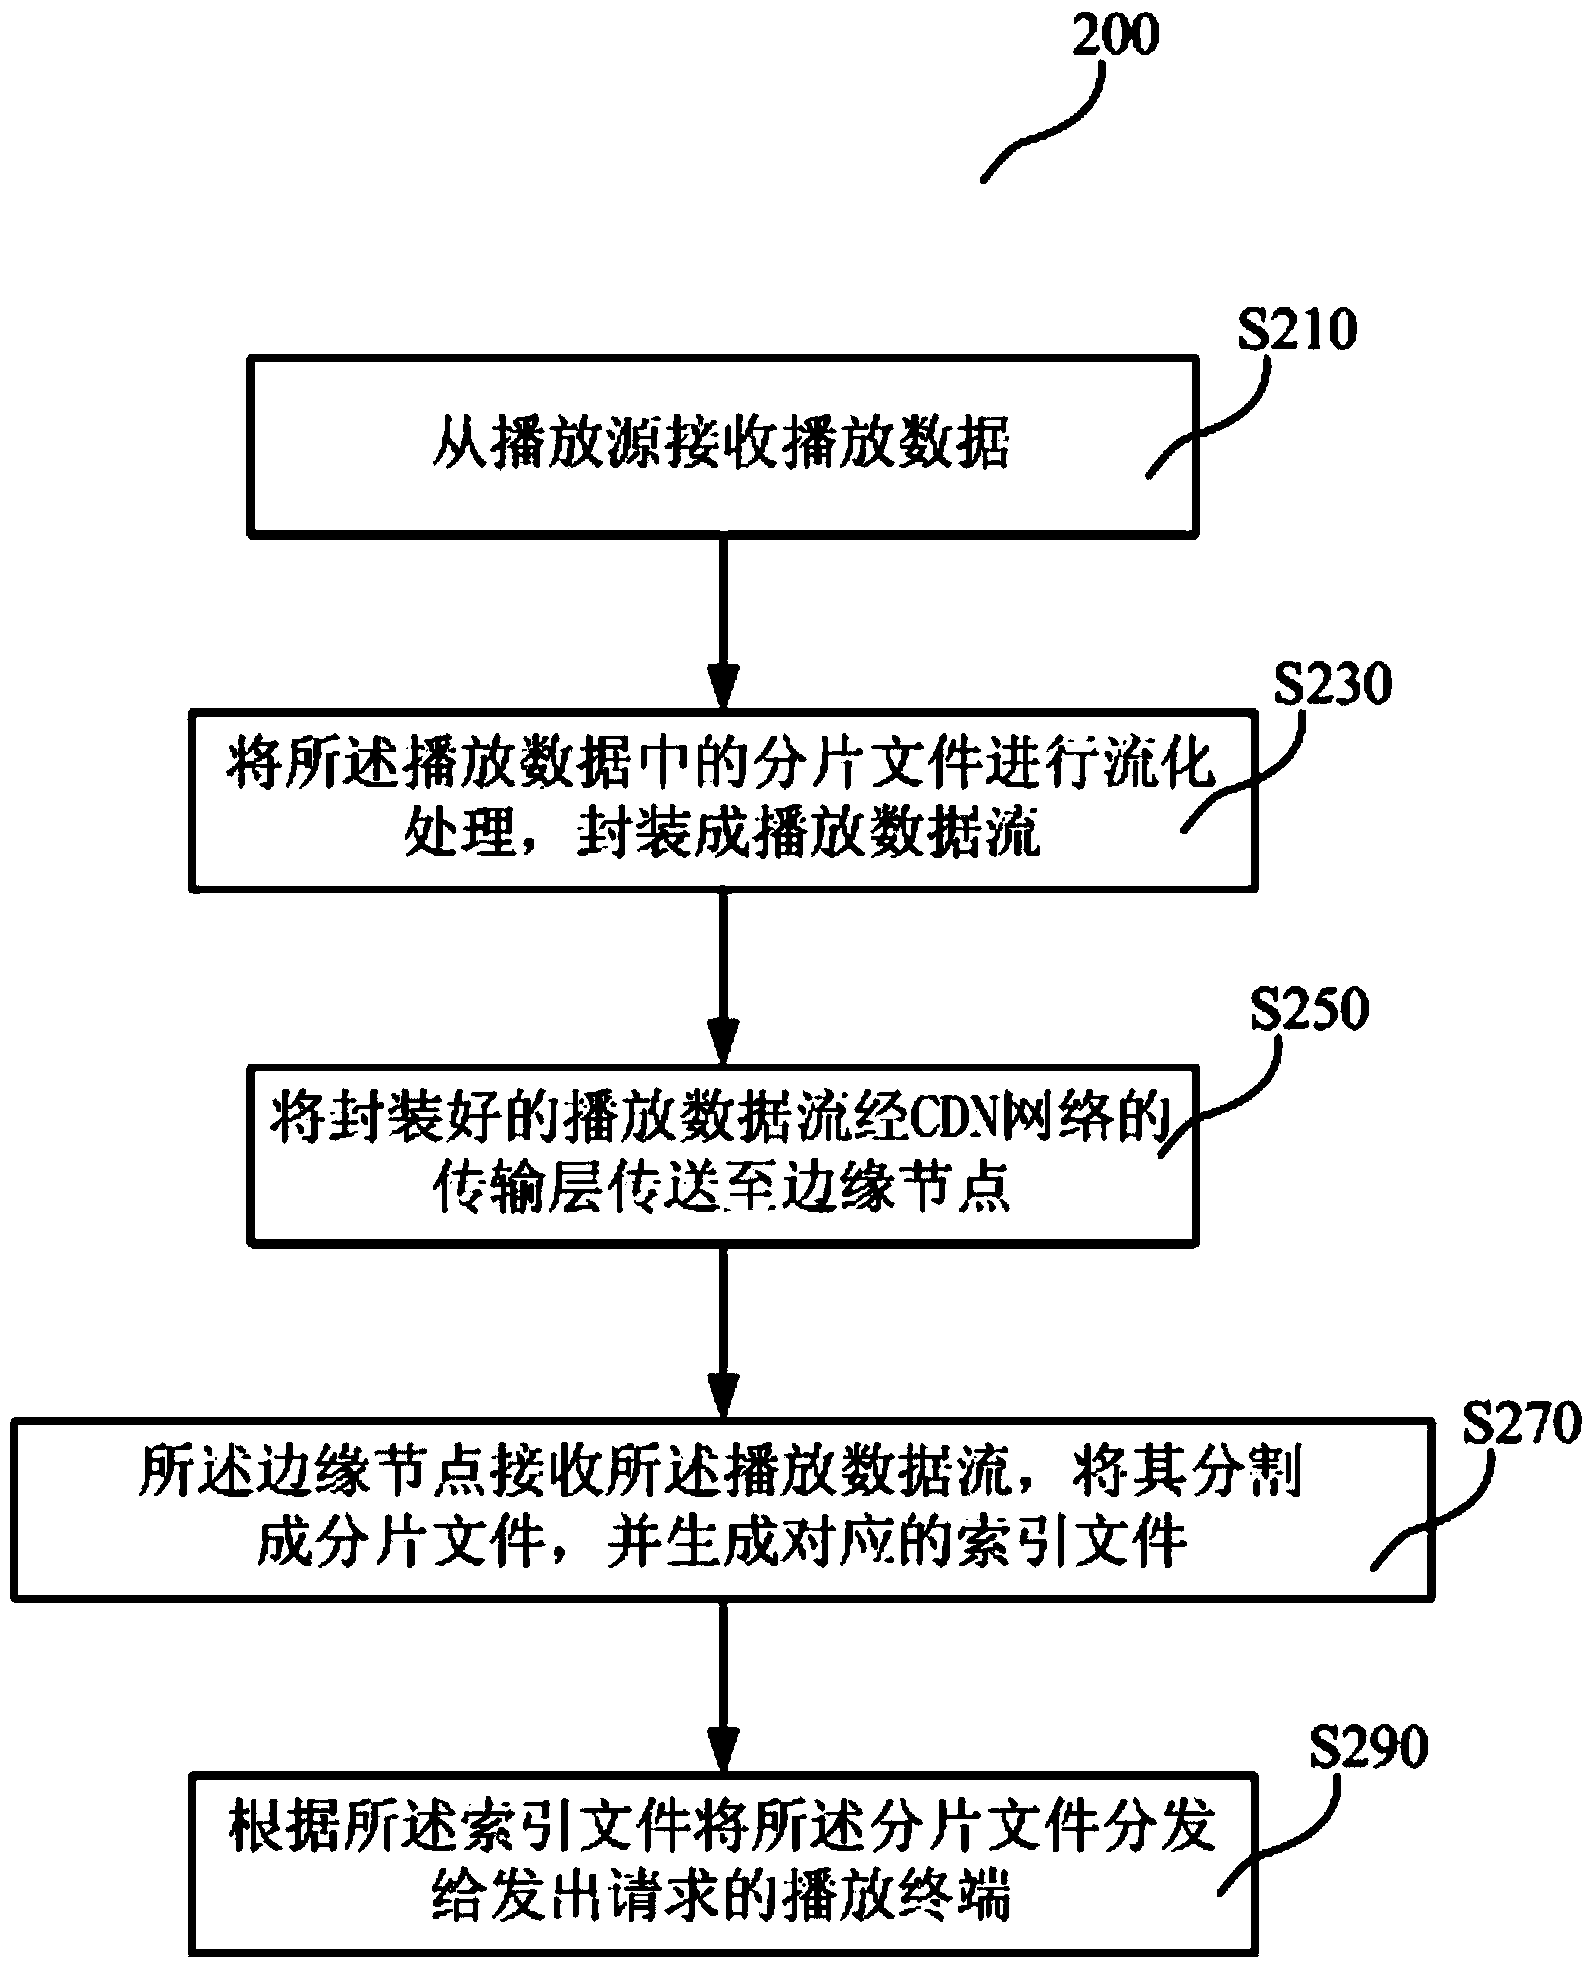 Content delivery network (CDN)-based transmission system and method